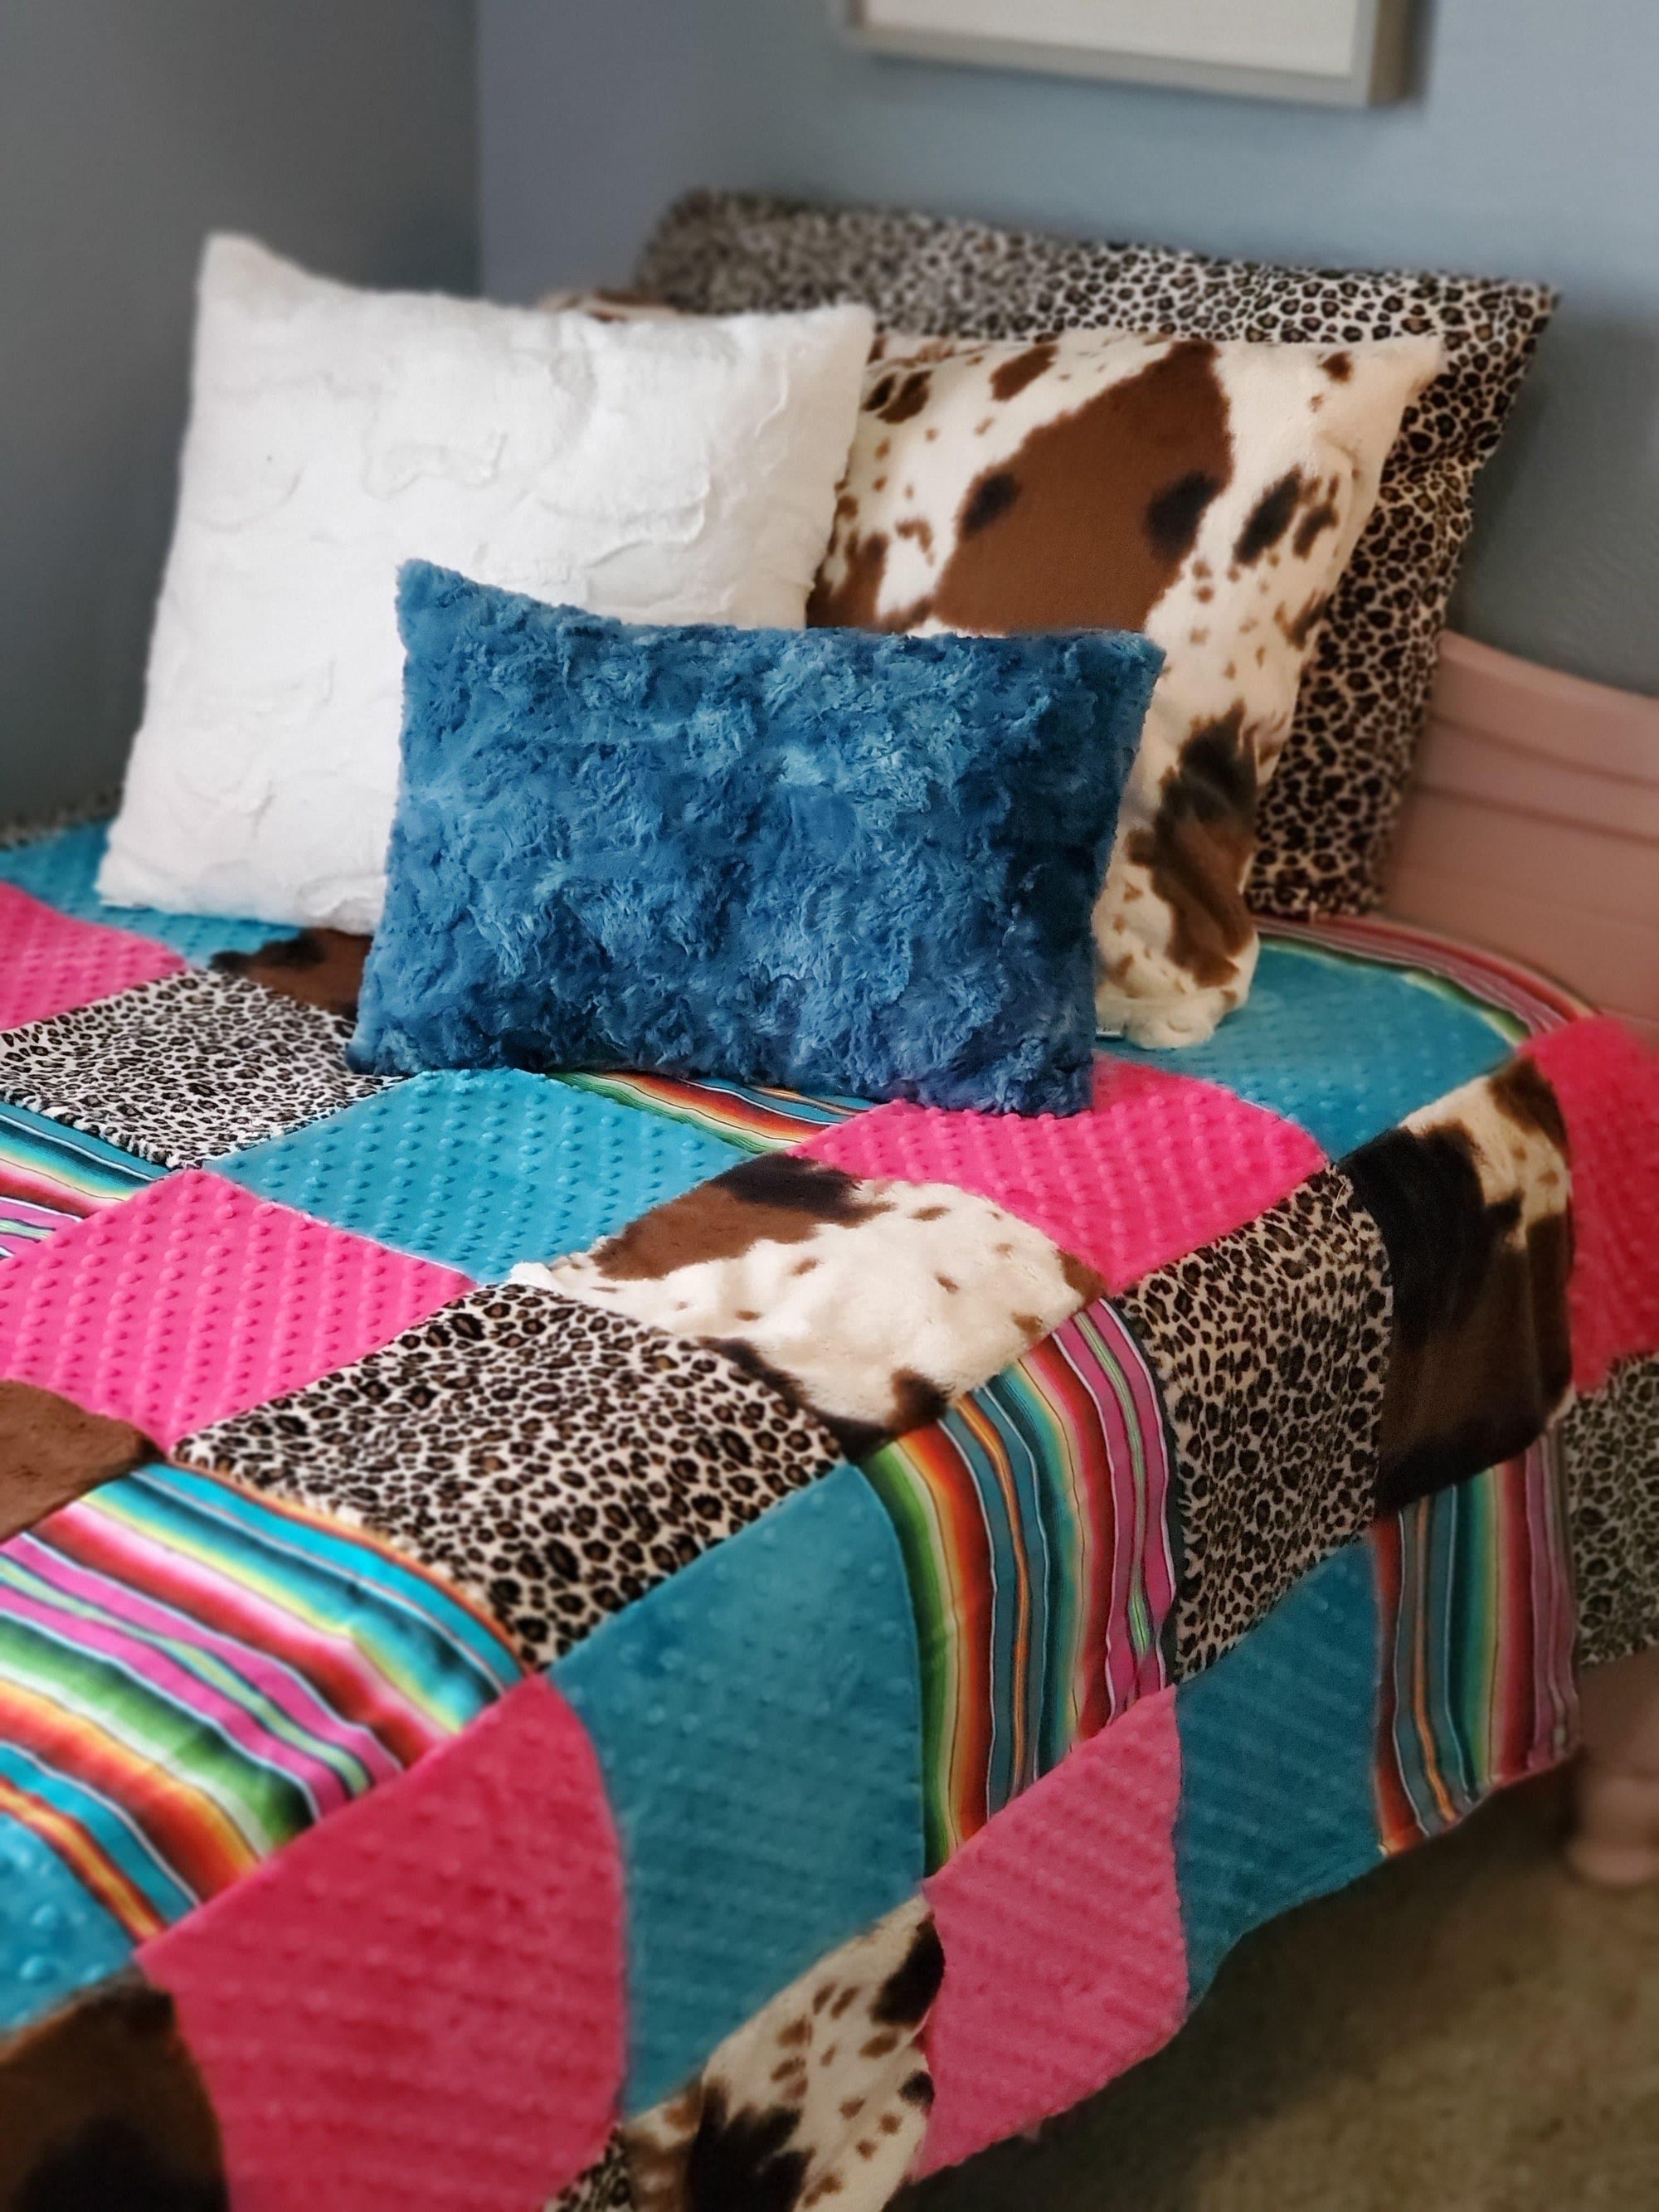 Twin, Full, or Queen Patchwork Blanket - Serape, Cheetah, and Cow - DBC Baby Bedding Co 